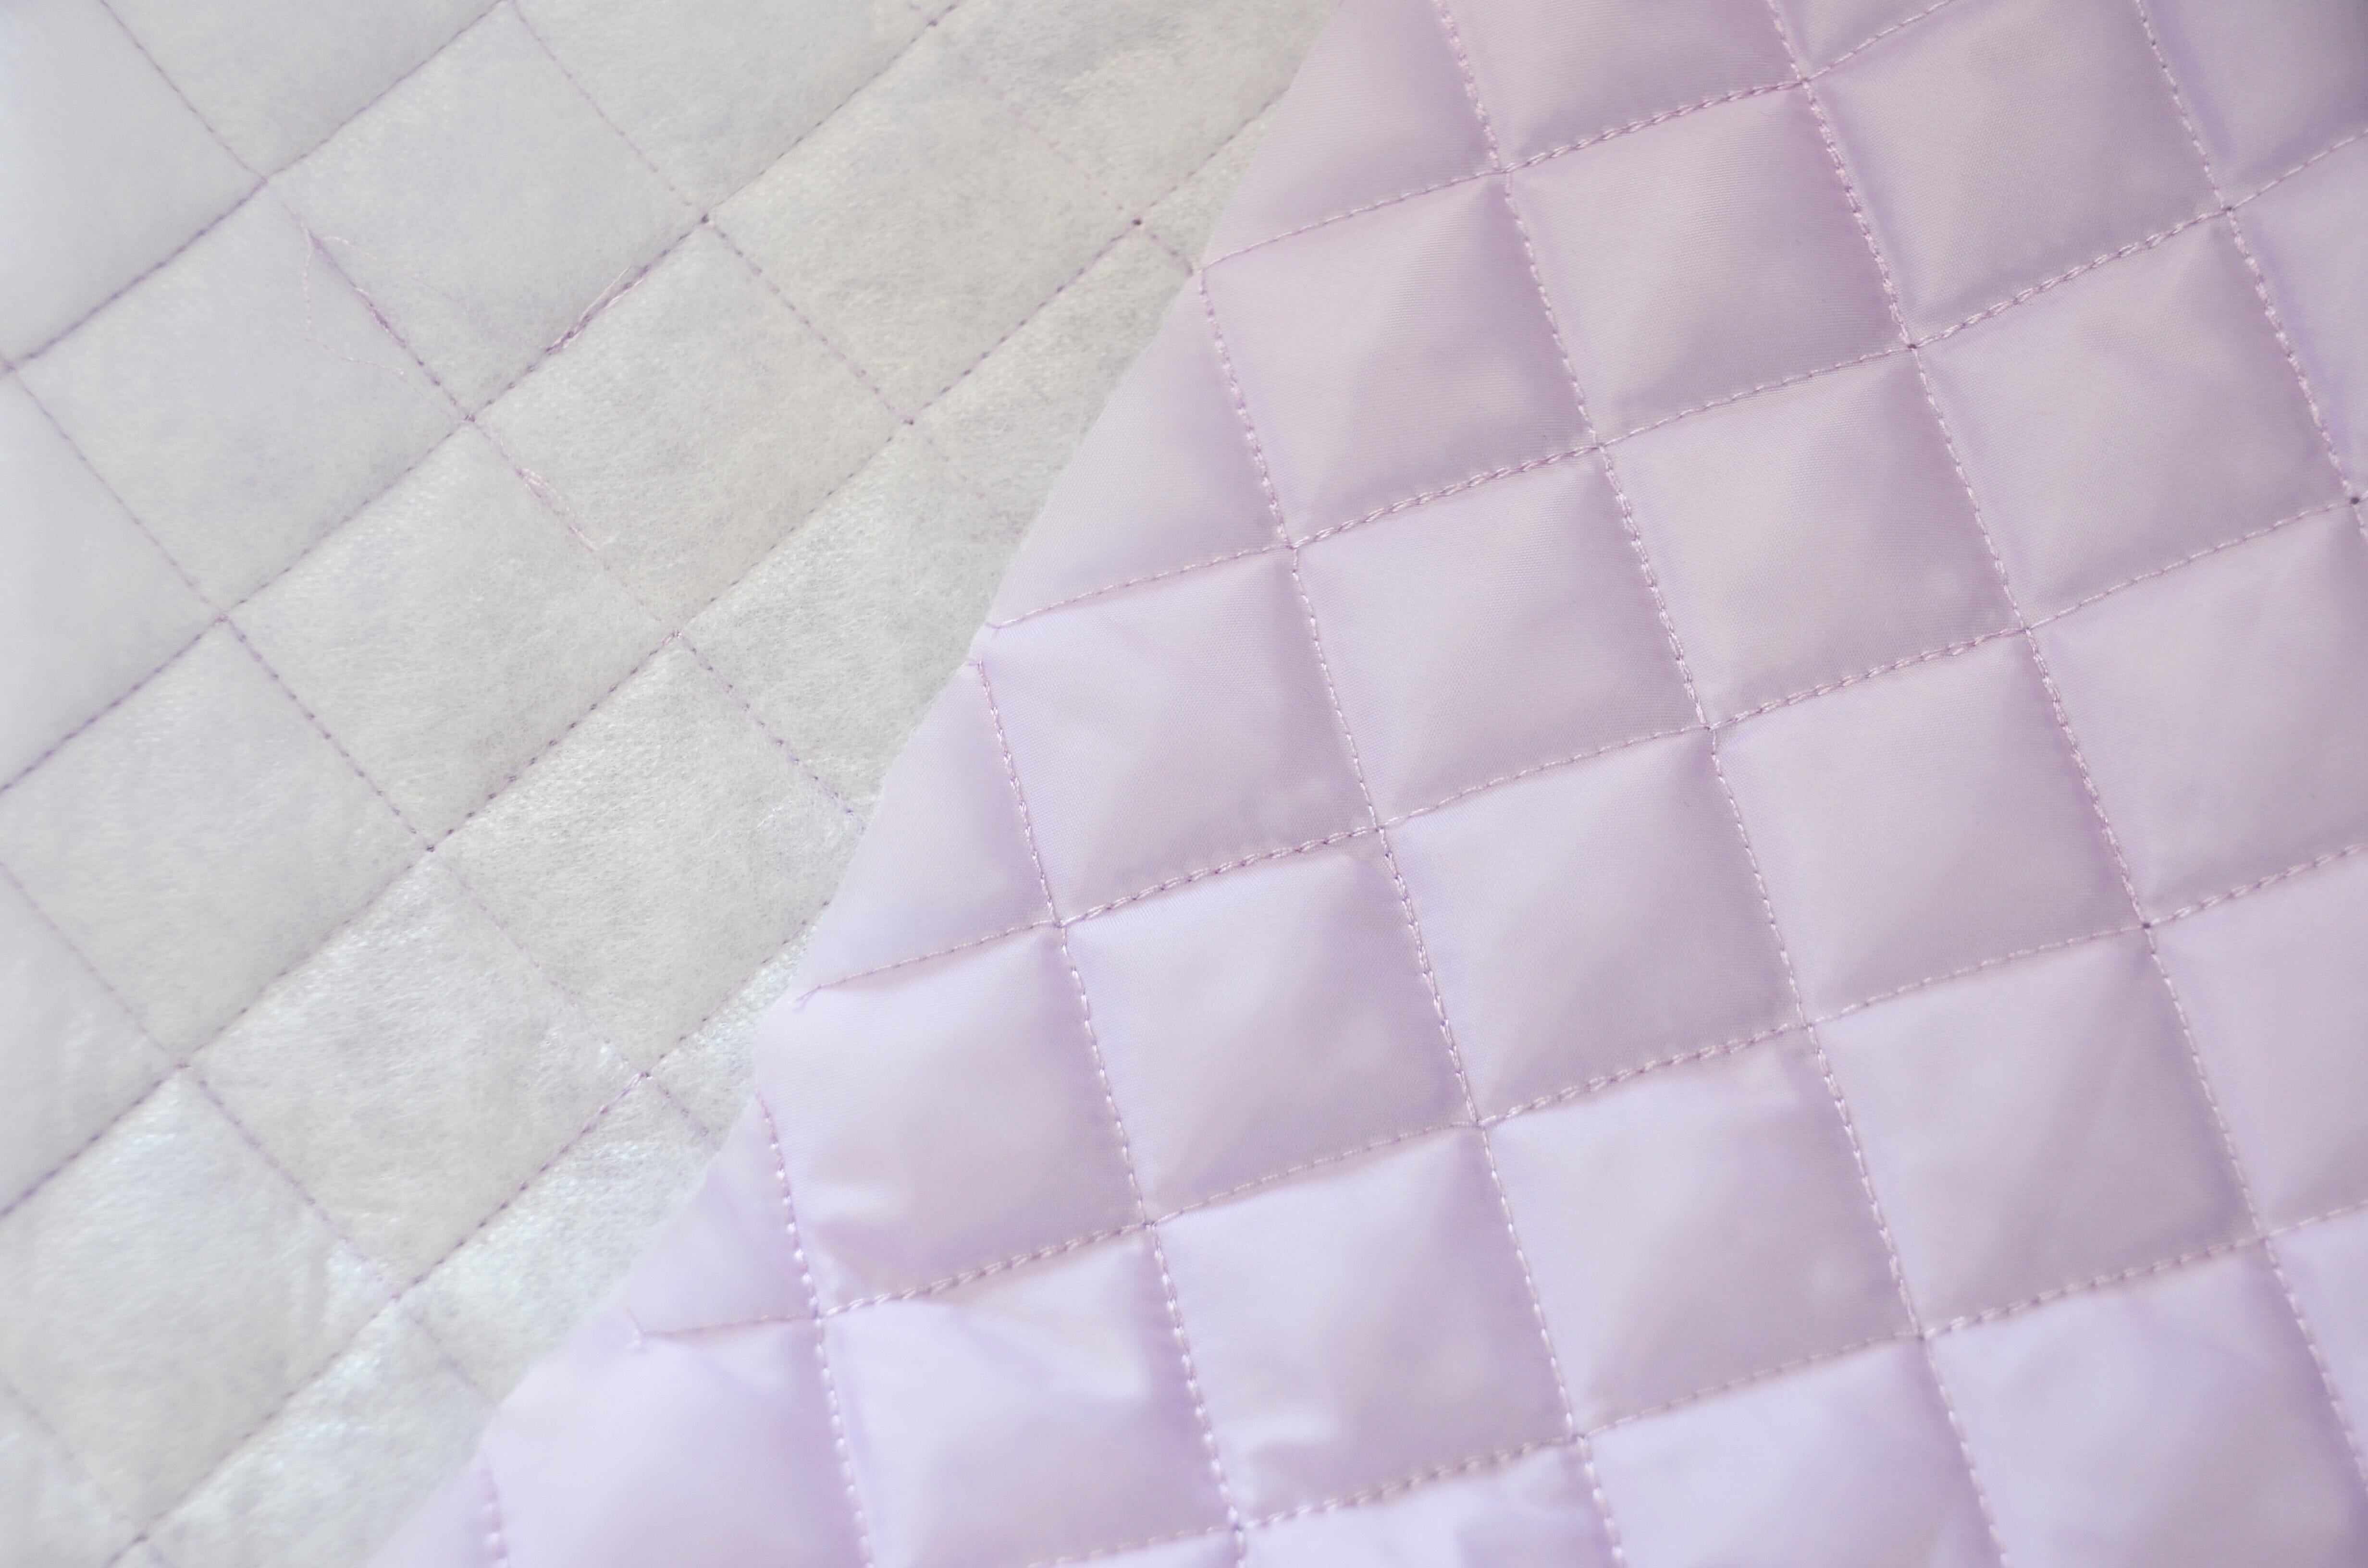 Light Pink Polyester Lining